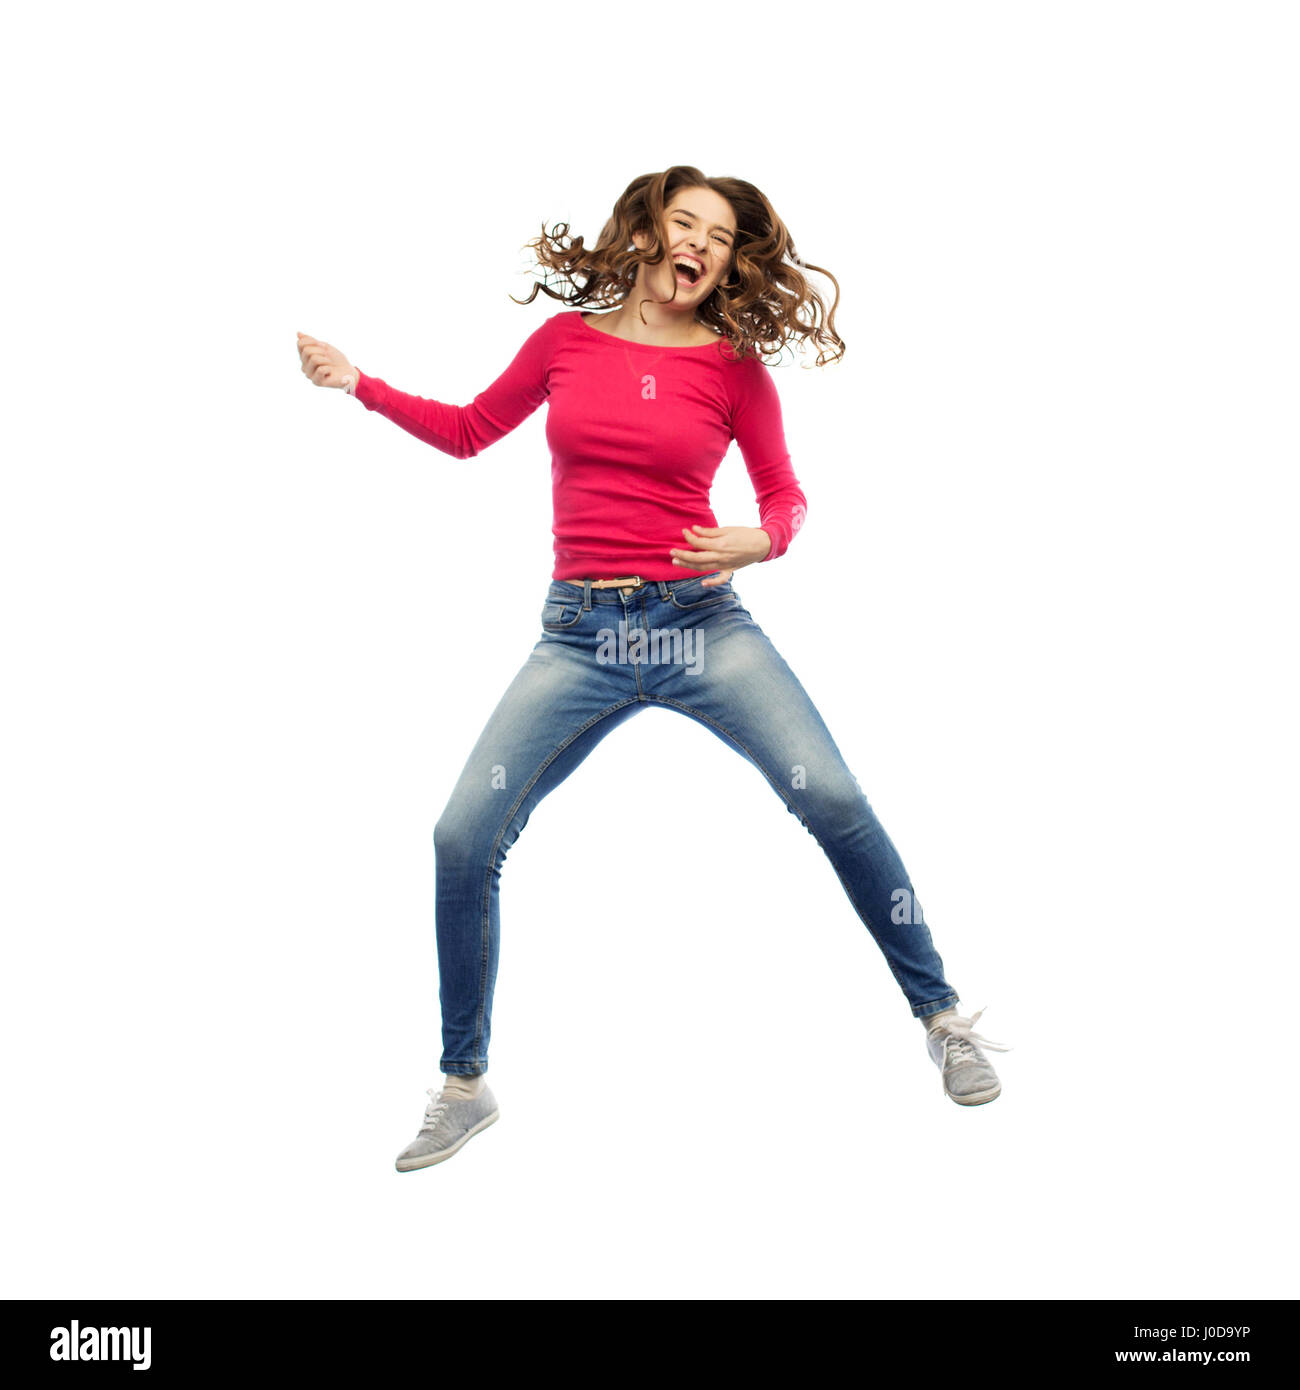 happy woman jumping and pretending guitar playing Stock Photo